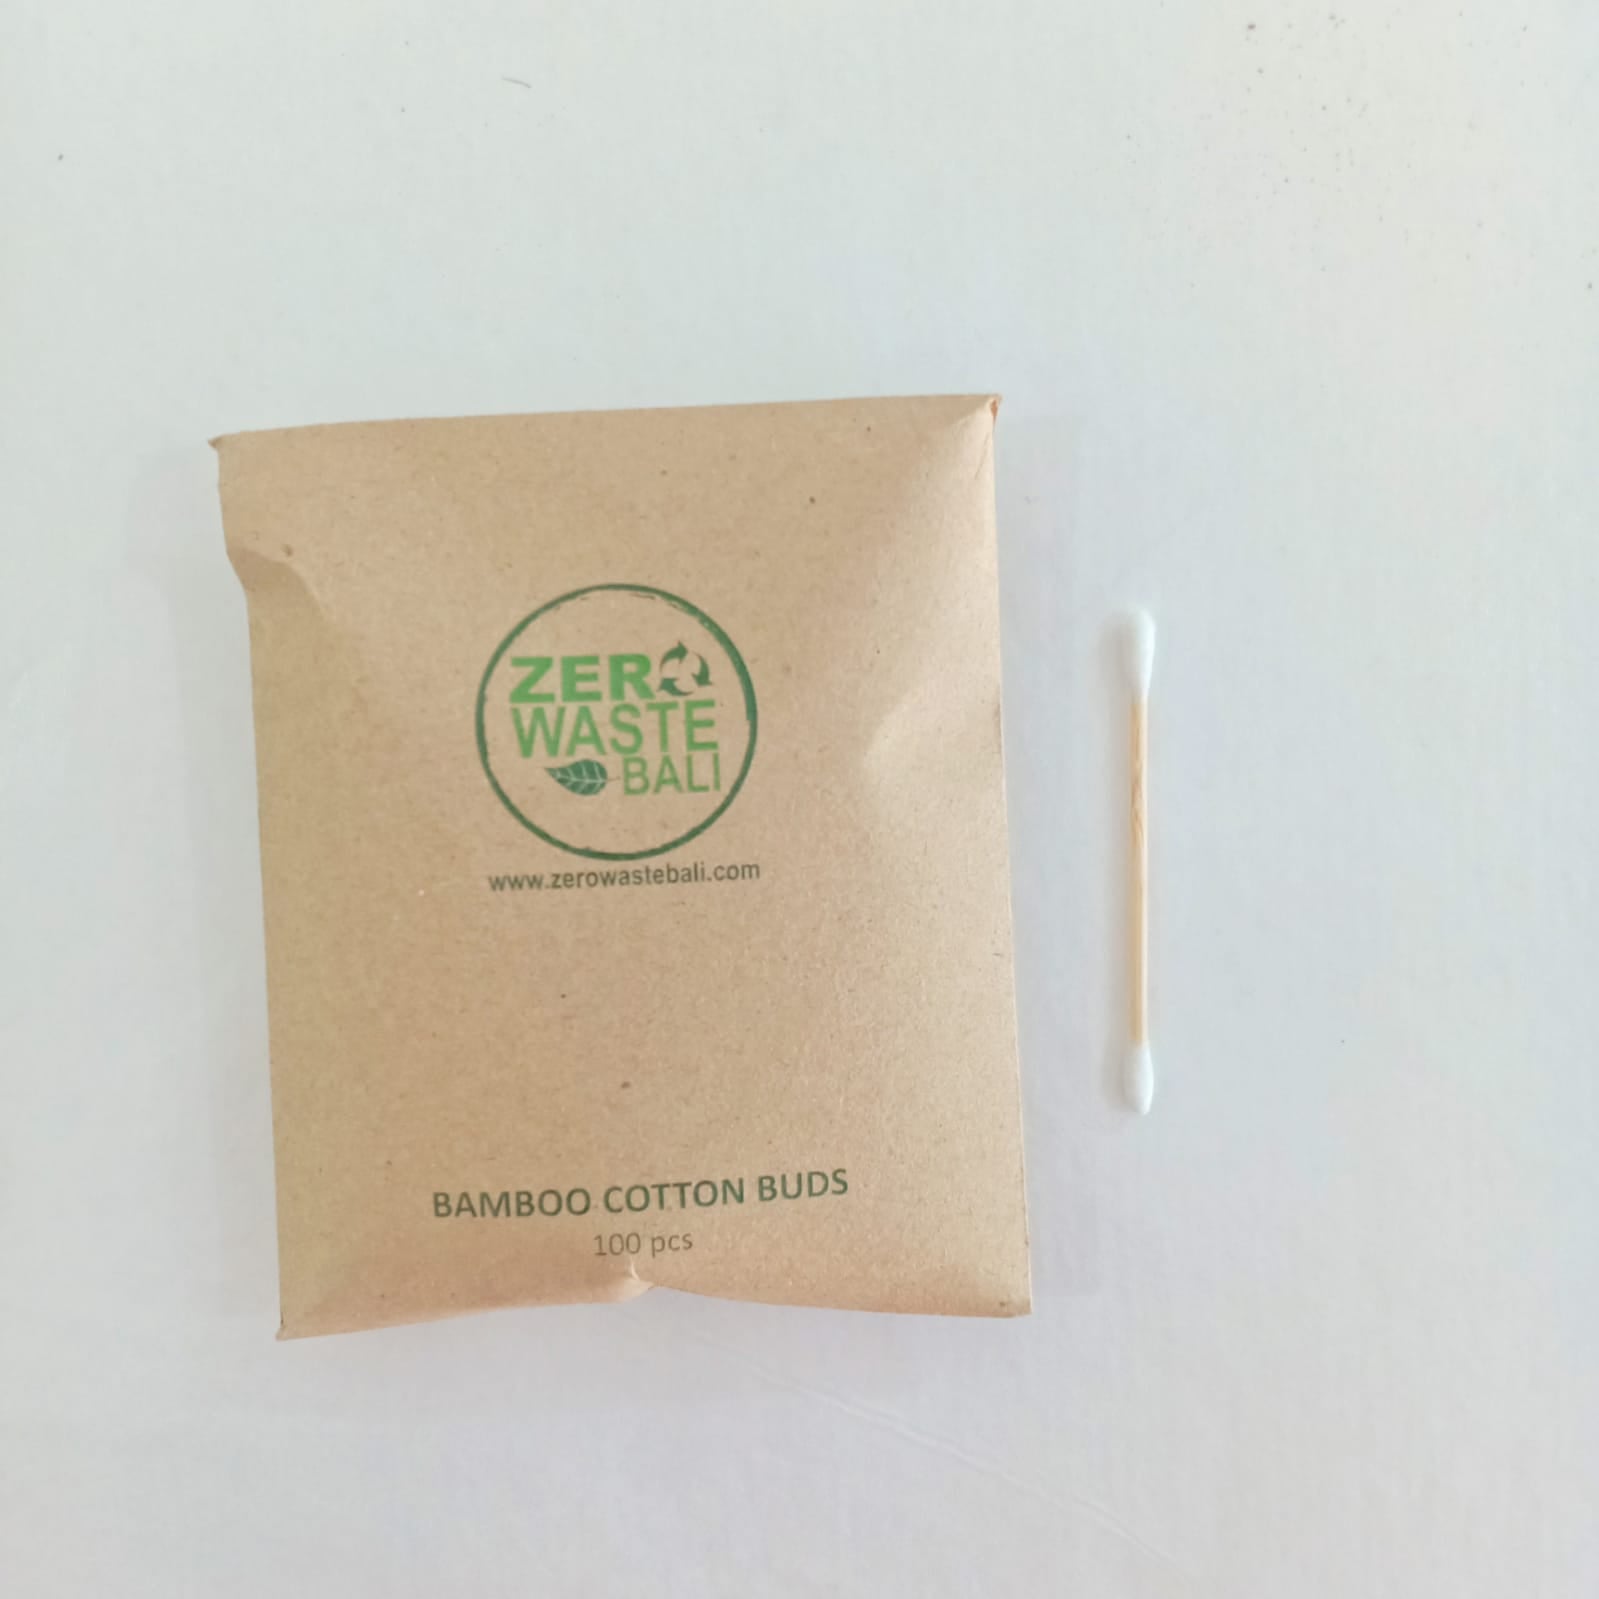 Bamboo Cotton Buds 100 pieces / Each